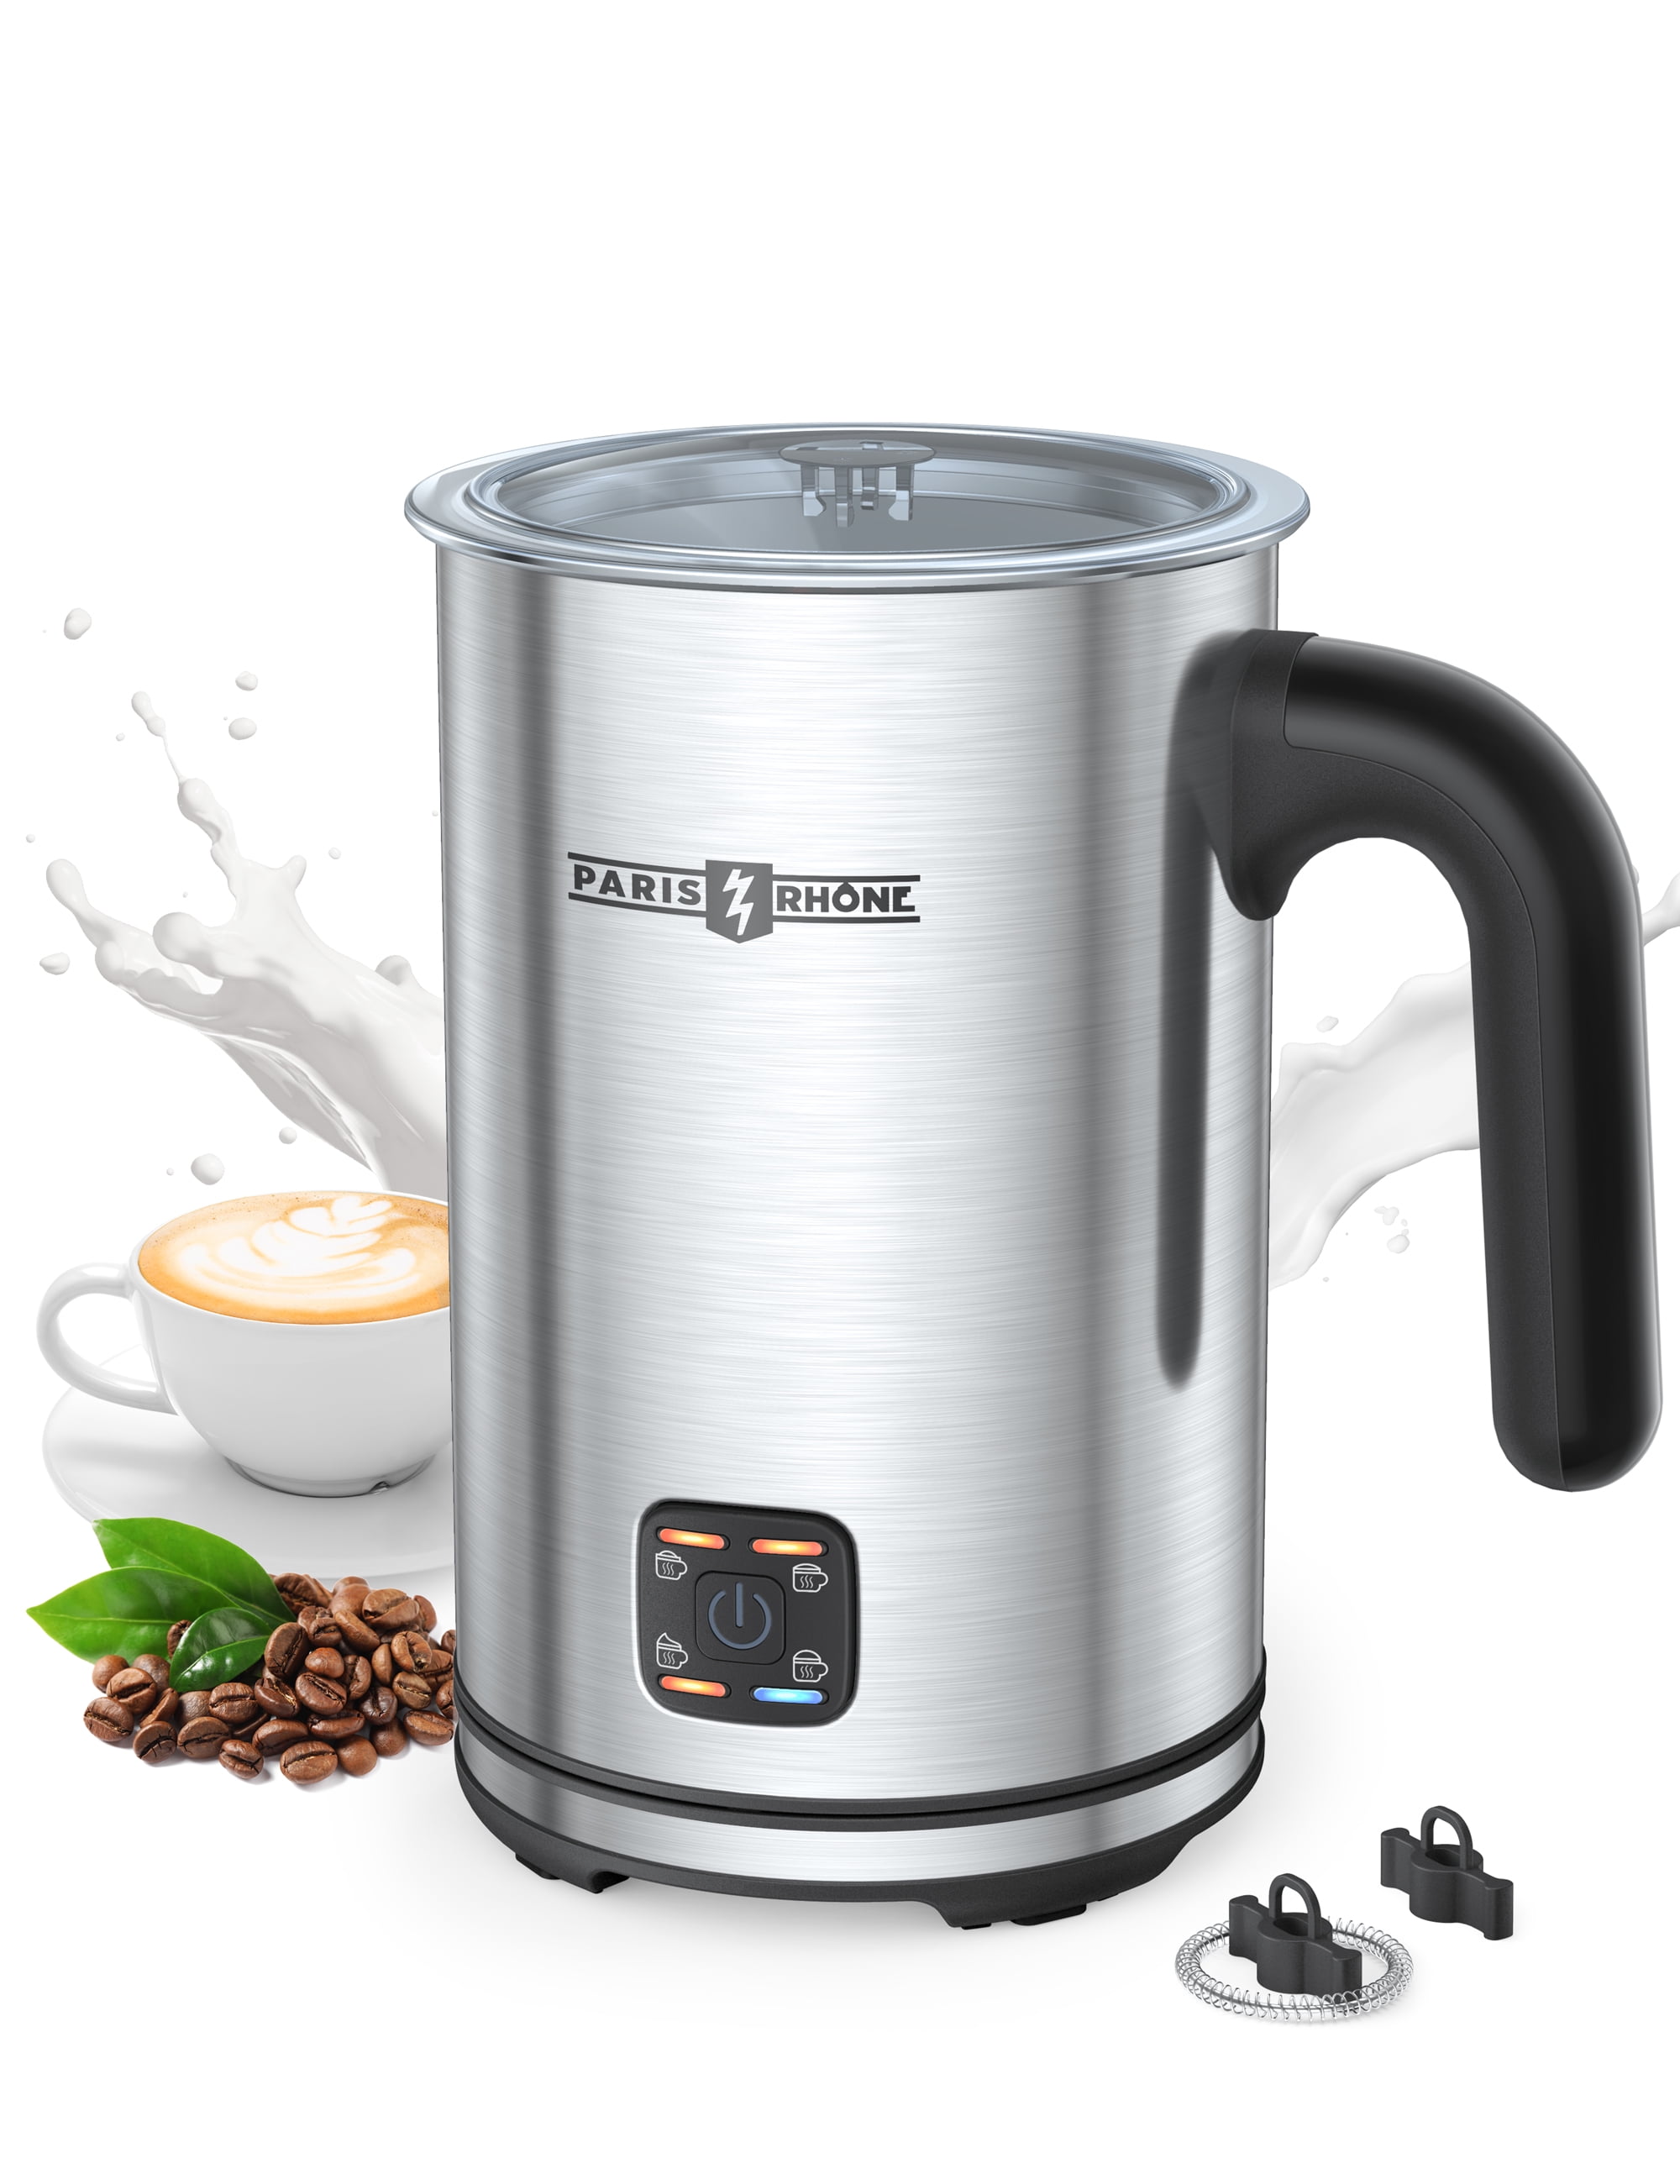 Automatic Cold Hot Milk Frother & Warmer Cappuccino 5.1 oz/10.1 oz Milk Frother IKICH,Electric Milk Frother & Steamer for Making Latte Coffee Frother Milk Heater white Hot Chocolate 